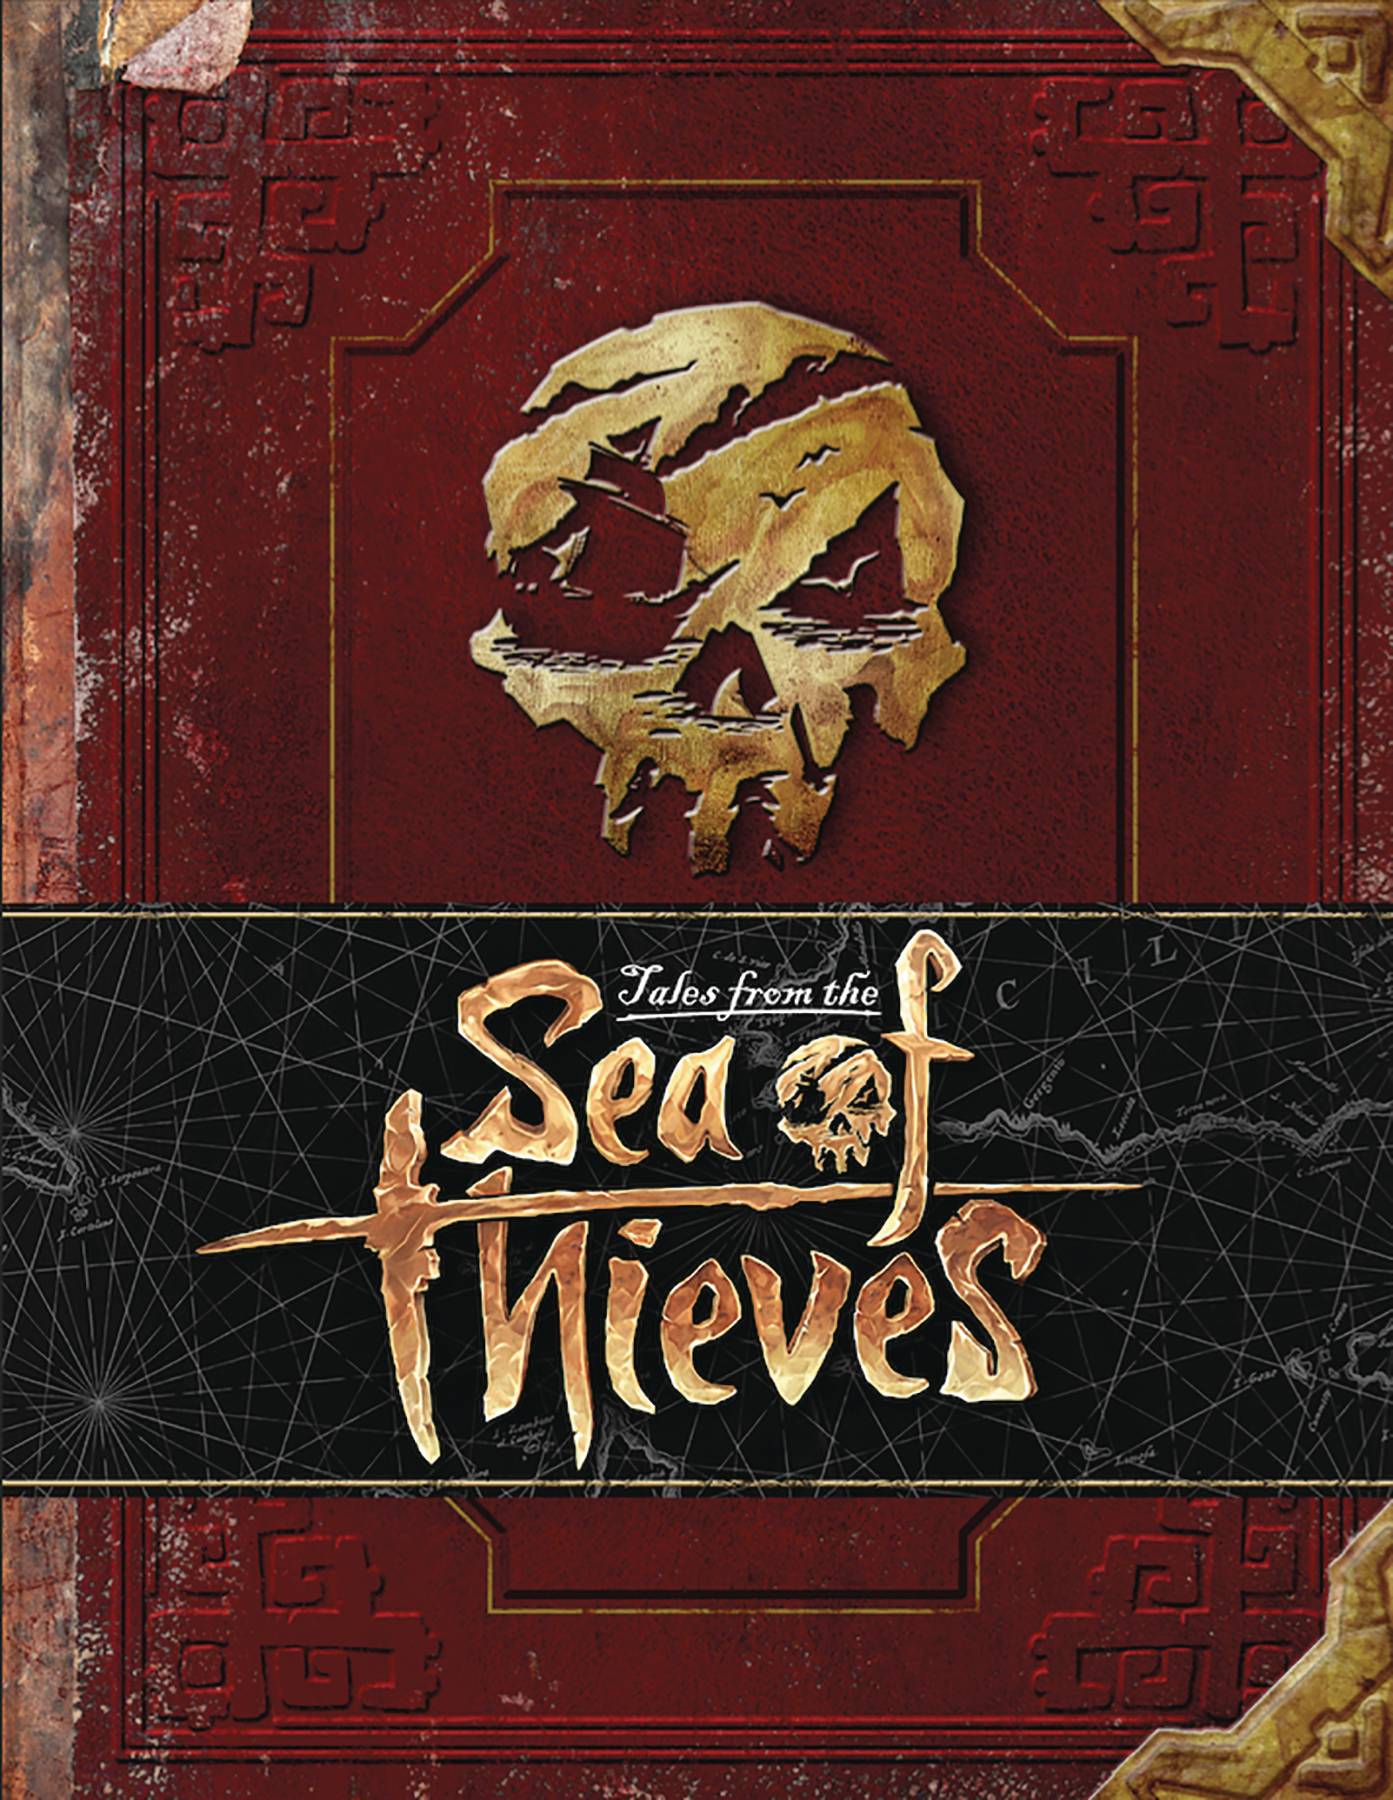 Tales From The Sea of Thieves Hardcover